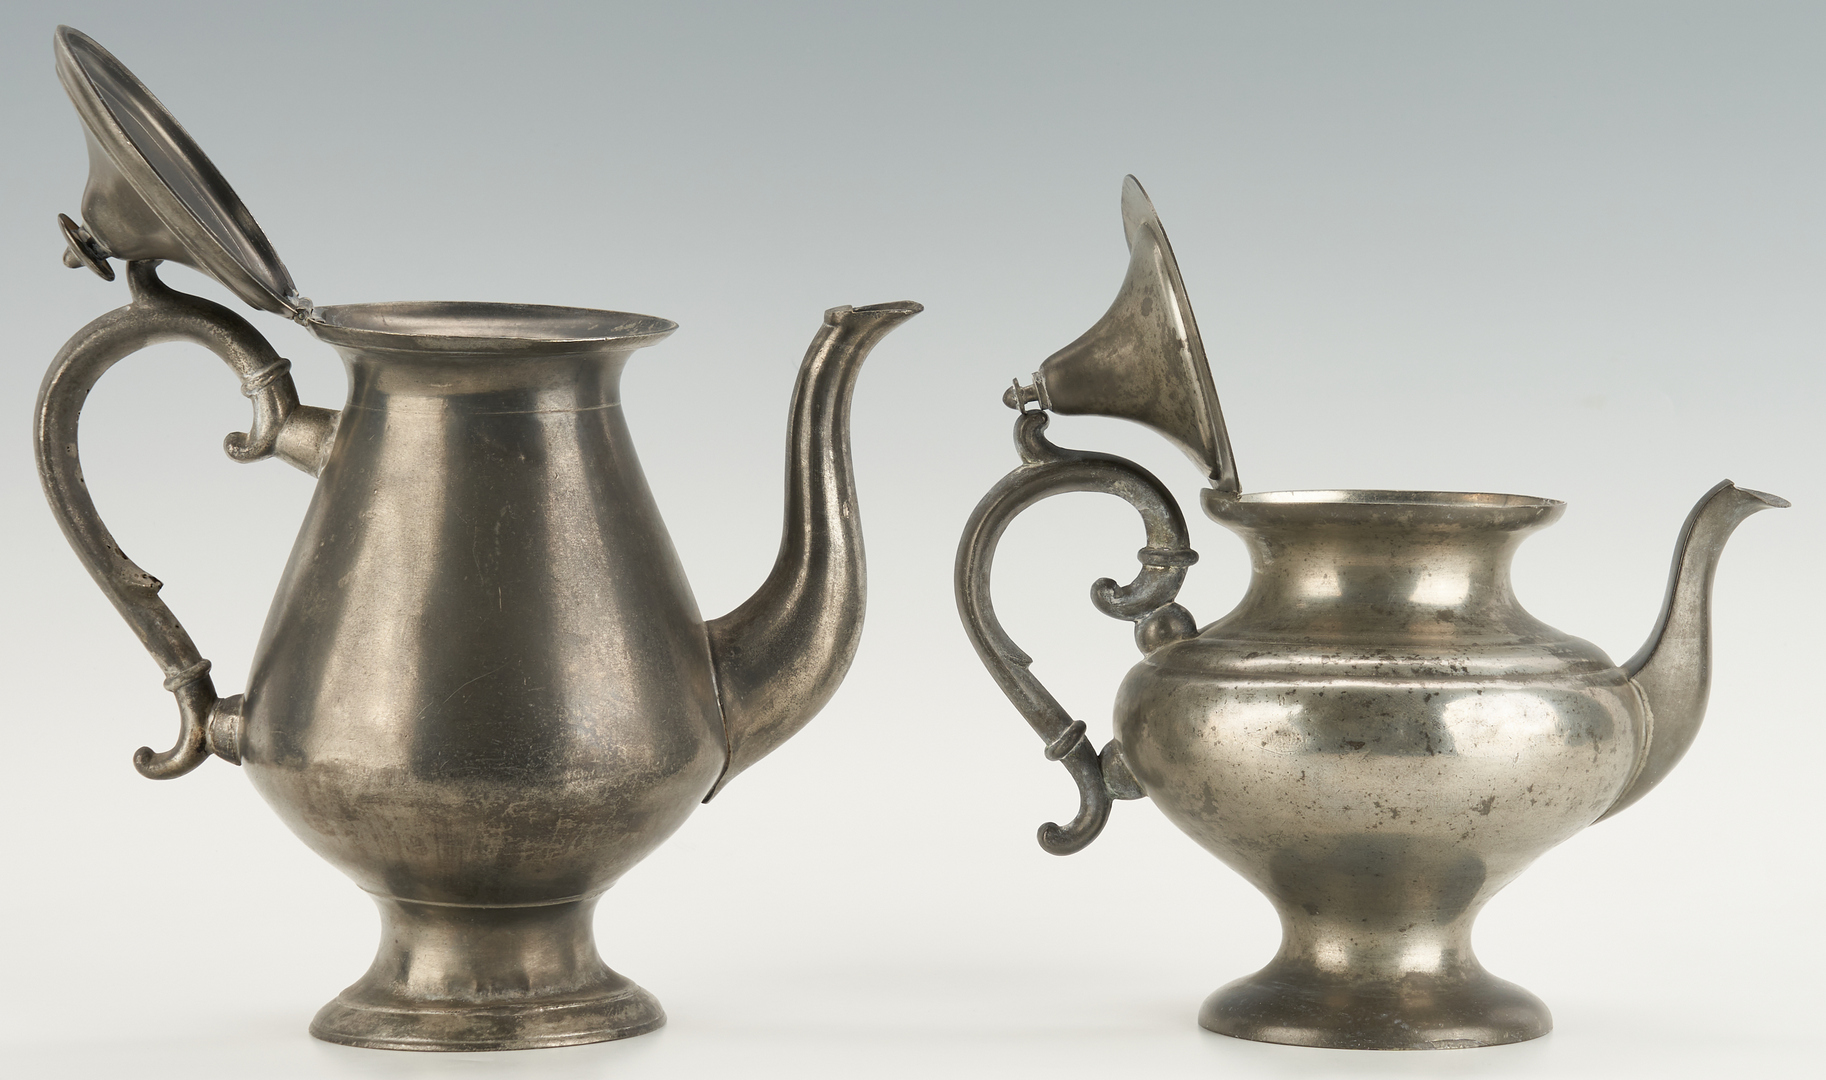 Lot 272: 5 American Pewter Tea and Coffee Pots, incl. Derby, Gleason, Ward, Dunham